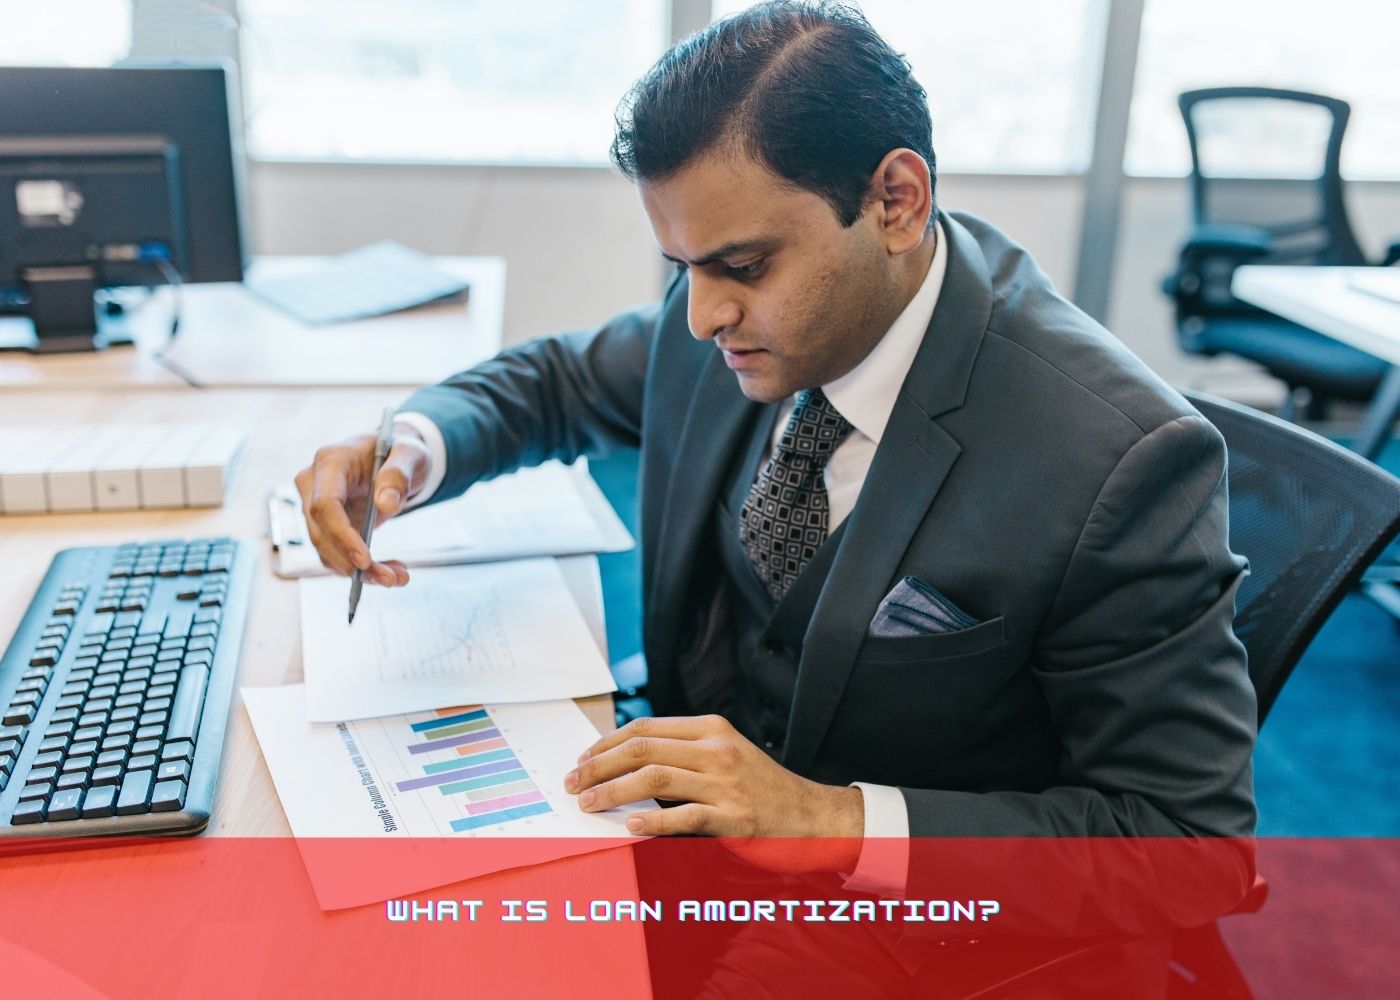 What is Loan Amortization? 